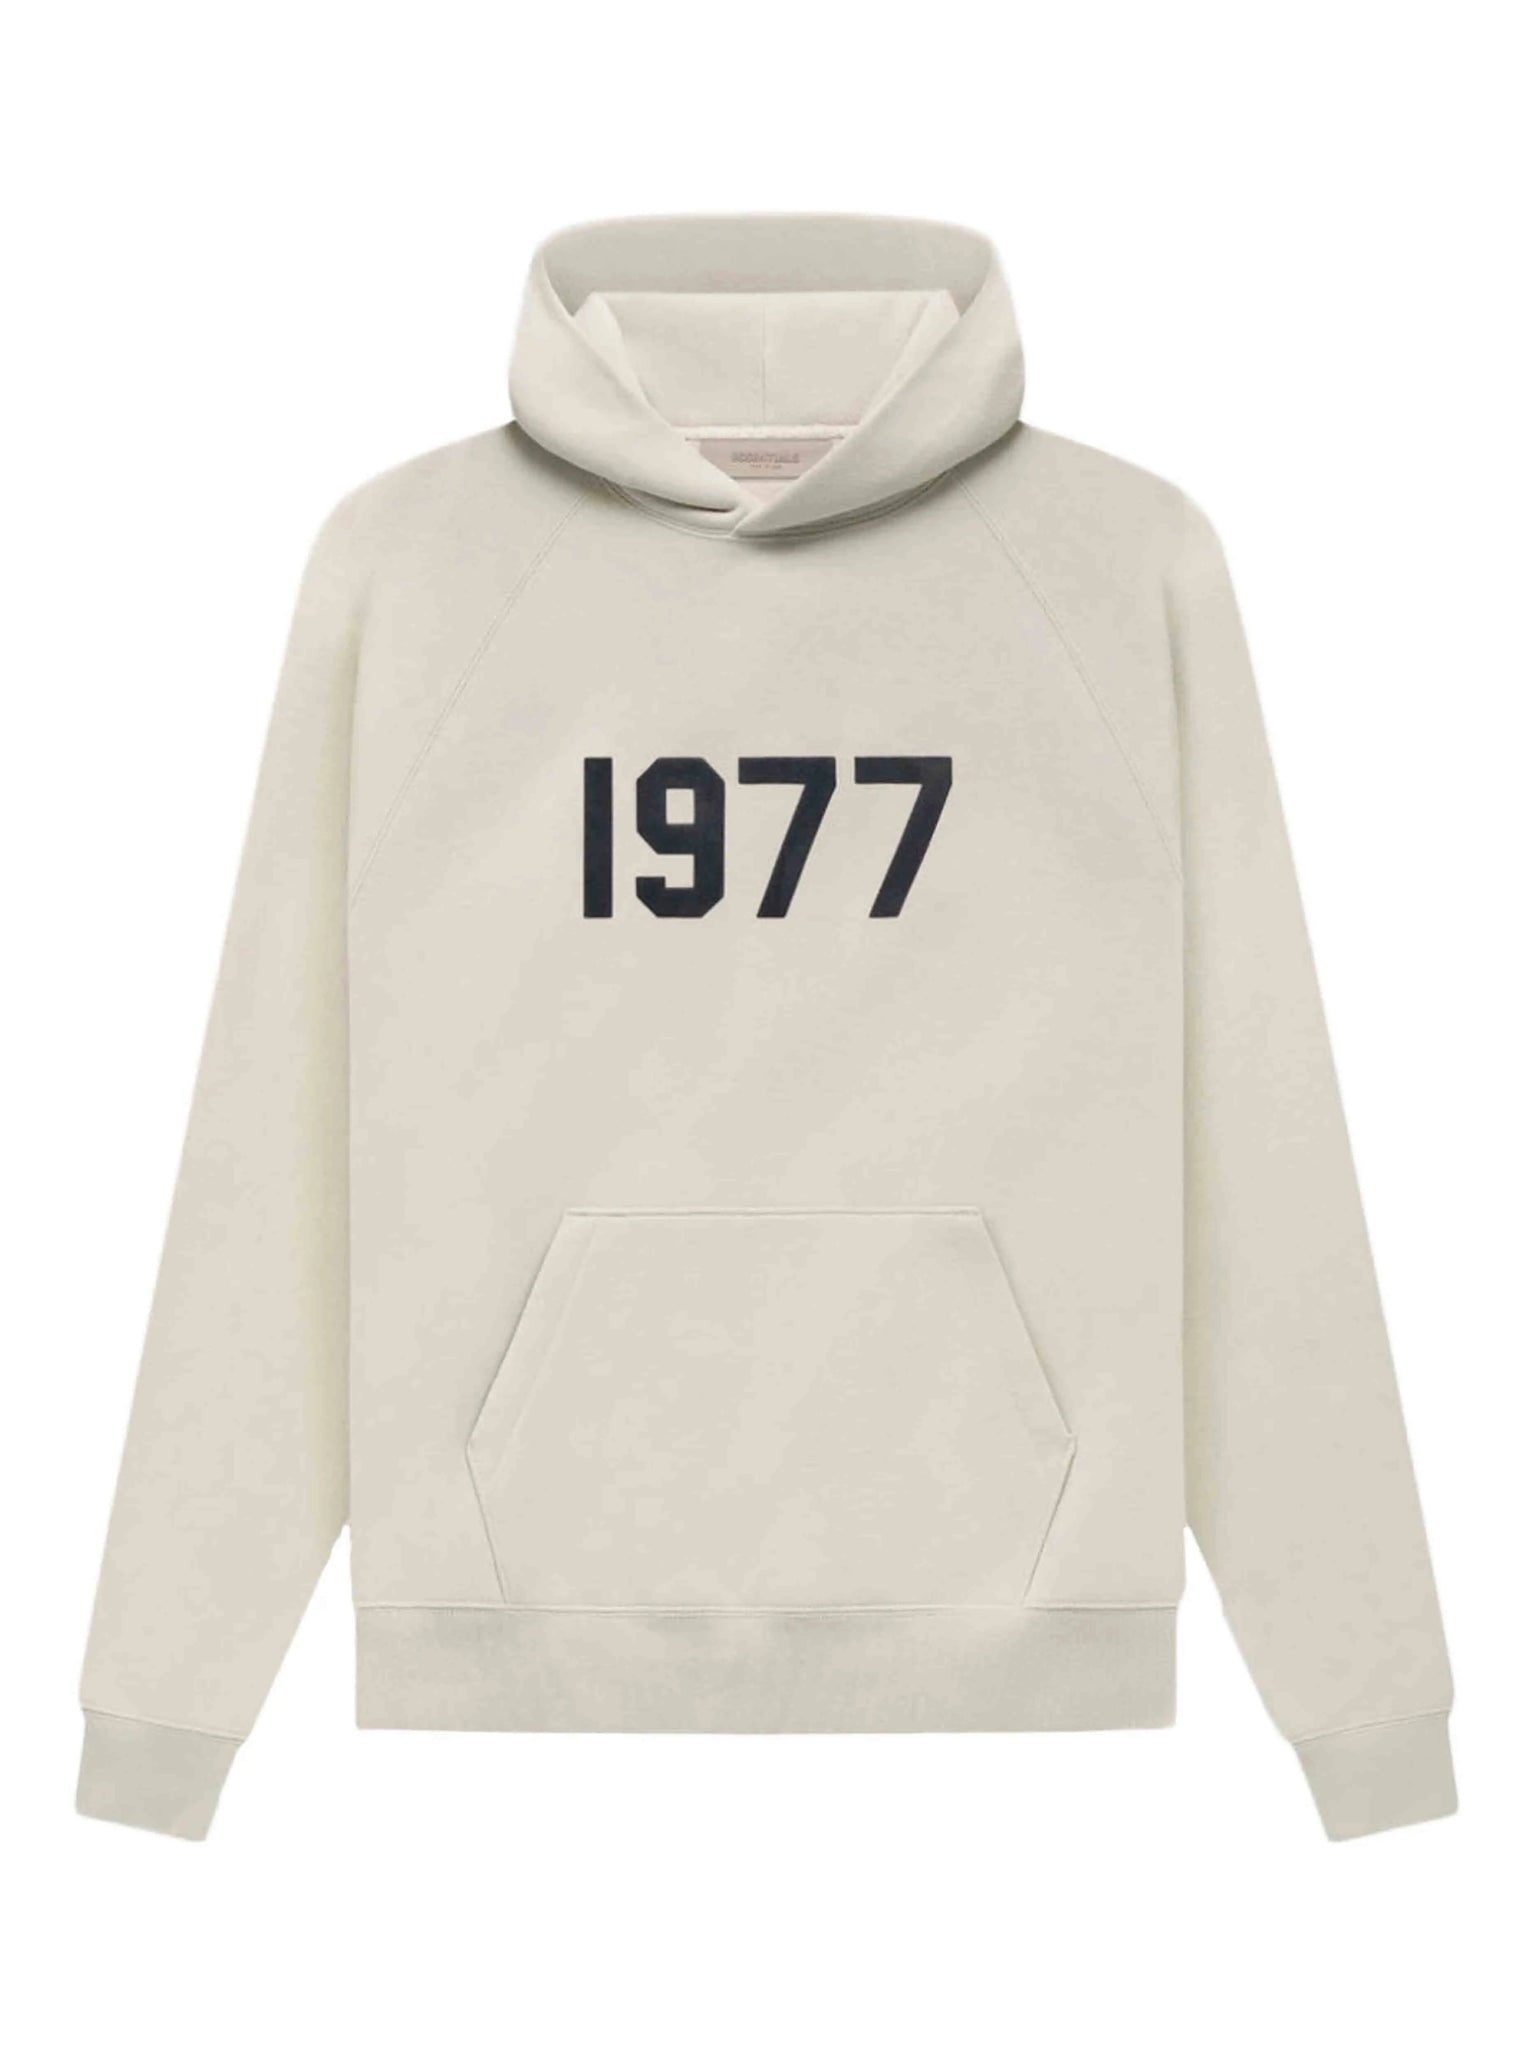 Fear of God Essentials 1977 Hoodie Wheat [SS22] Prior